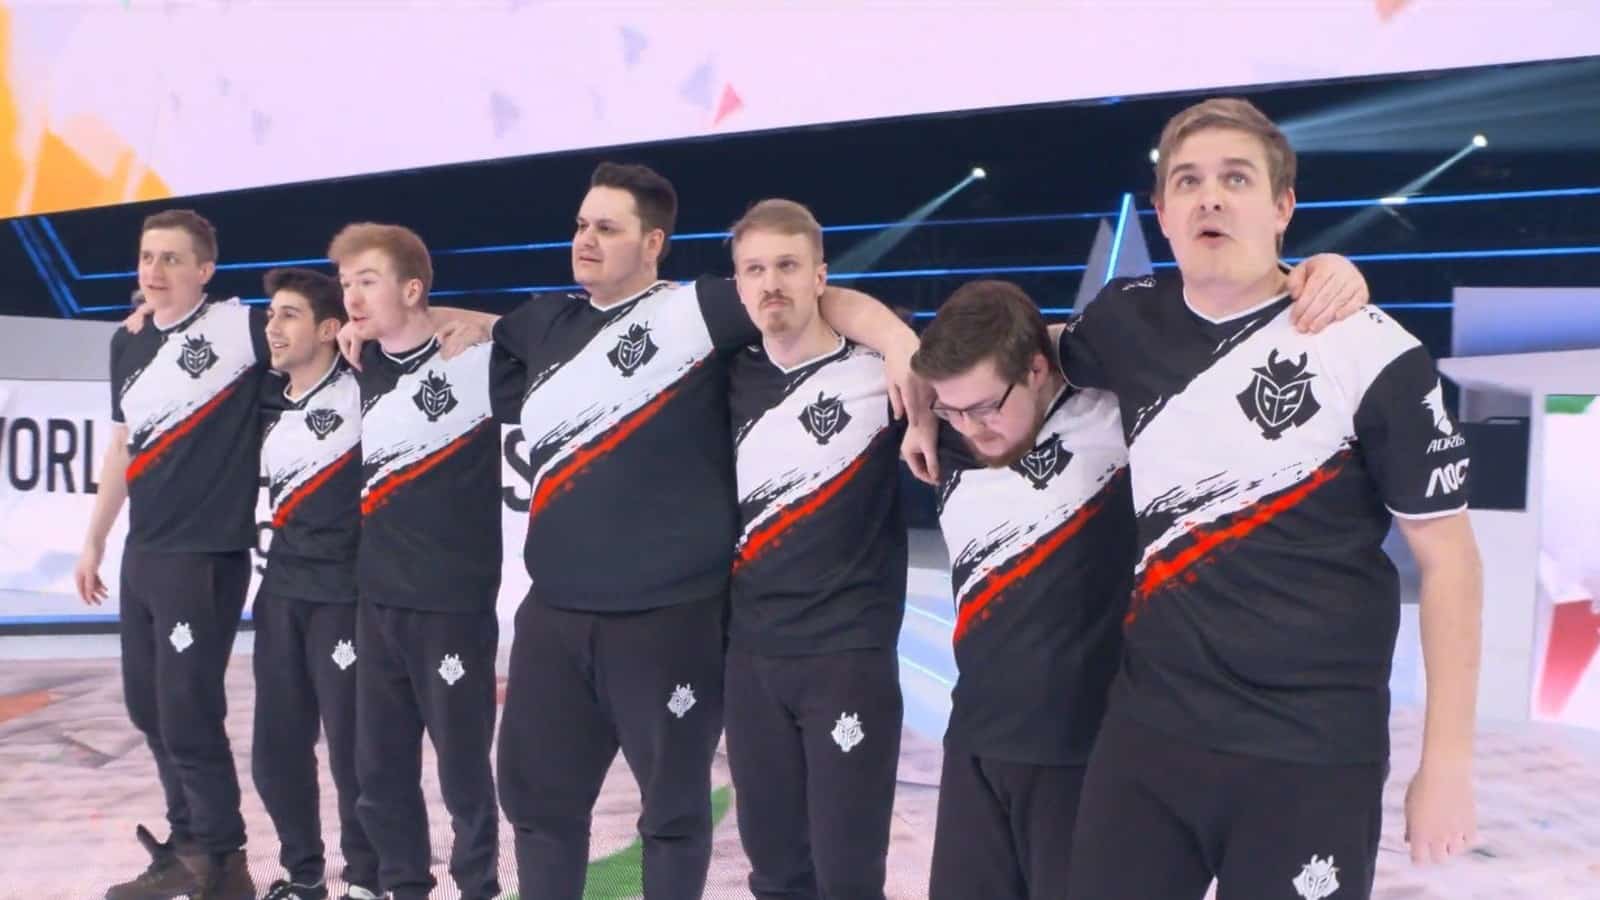 G2 after winning the Six Invitational in 2019